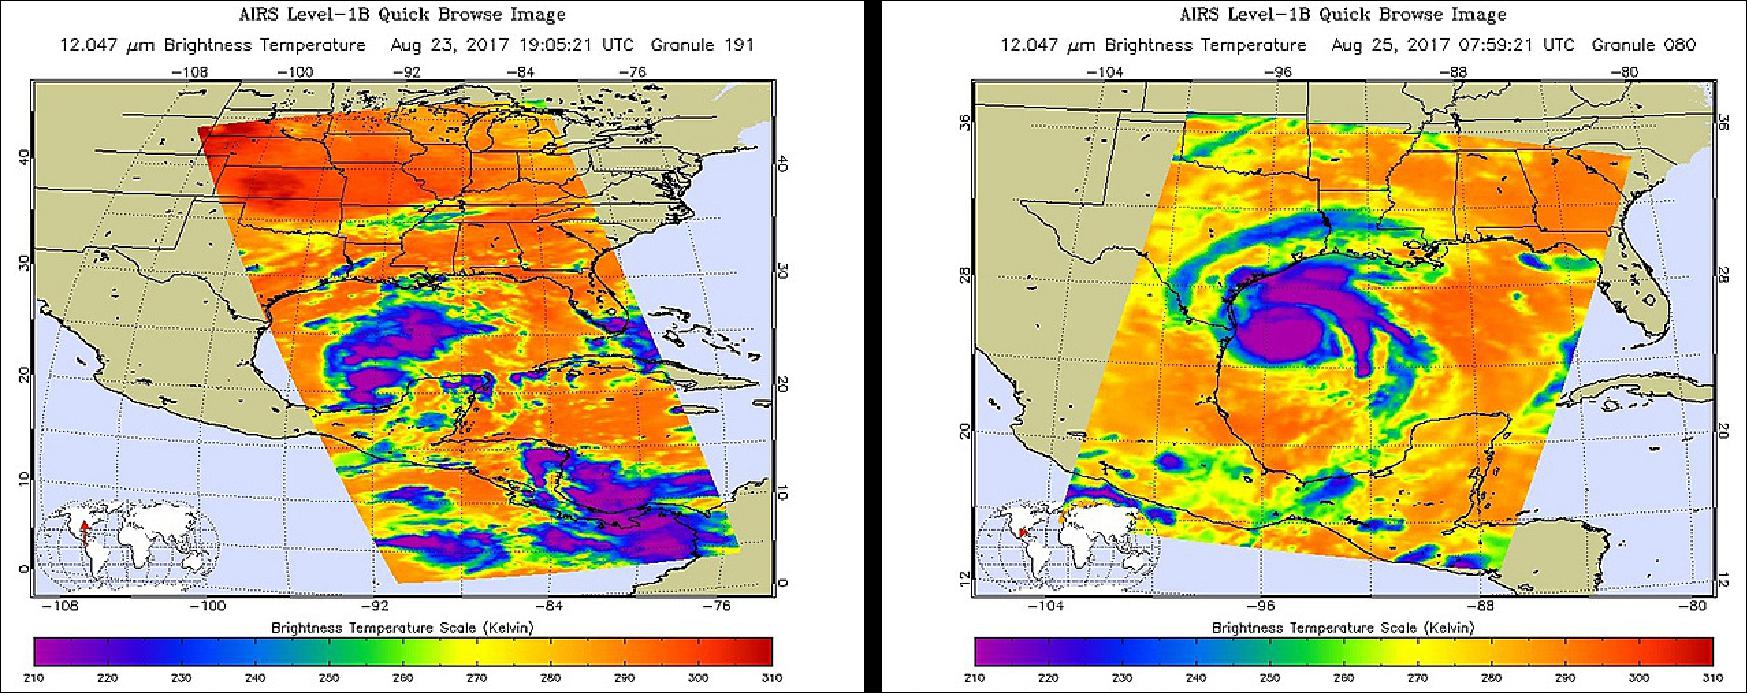 Figure 96: Hurricane Harvey as seen by the AIRS infrared instrument on NASA’s Aqua satellite at 3 p.m. CDT on Wednesday, Aug. 23 (left) and at 3 a.m. CDT on Friday, Aug. 25 (right). The darker the color, the colder and higher the clouds and the stronger the thunderstorms (image credit: NASA/JPL-Caltech)